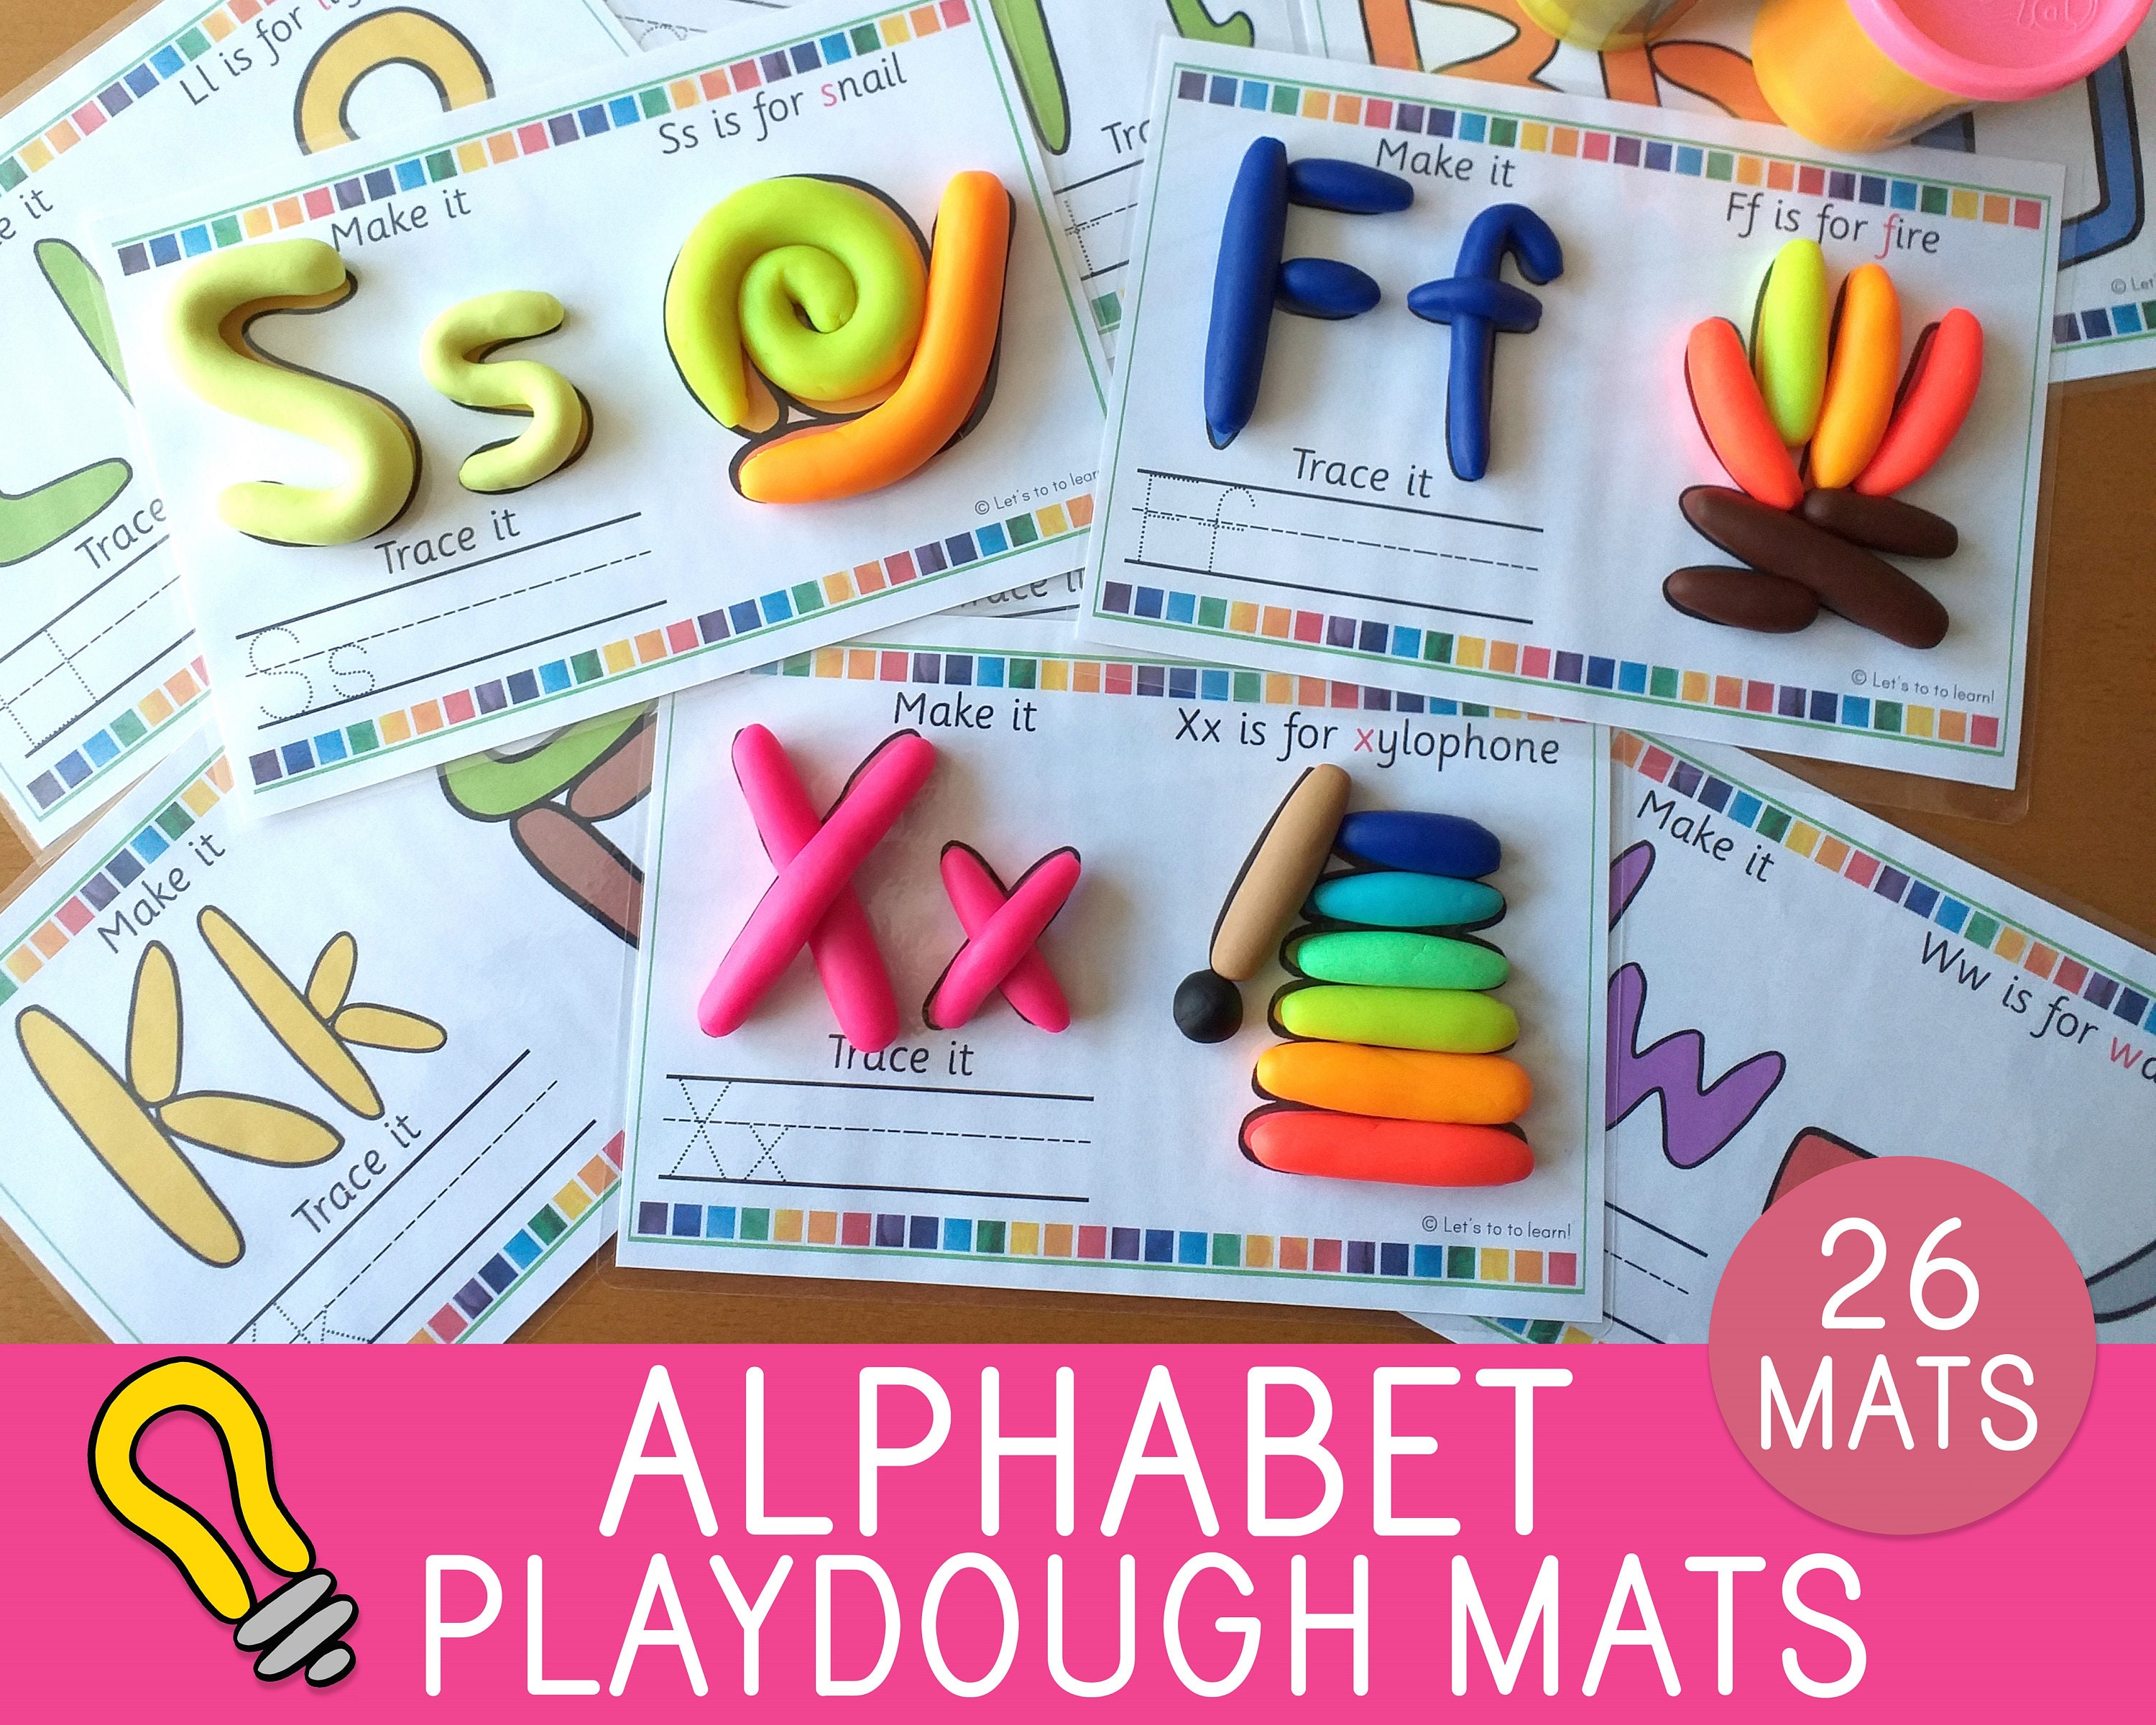  Colorations Alphabet Dough Stampers Set, Lowercase Letters, 26  Letter Stamps for Toddlers & Preschool Kids, Learn ABC & Spelling, Play  Dough Creative Play for Classrooms, Daycare, School, Homeschool : Toys 